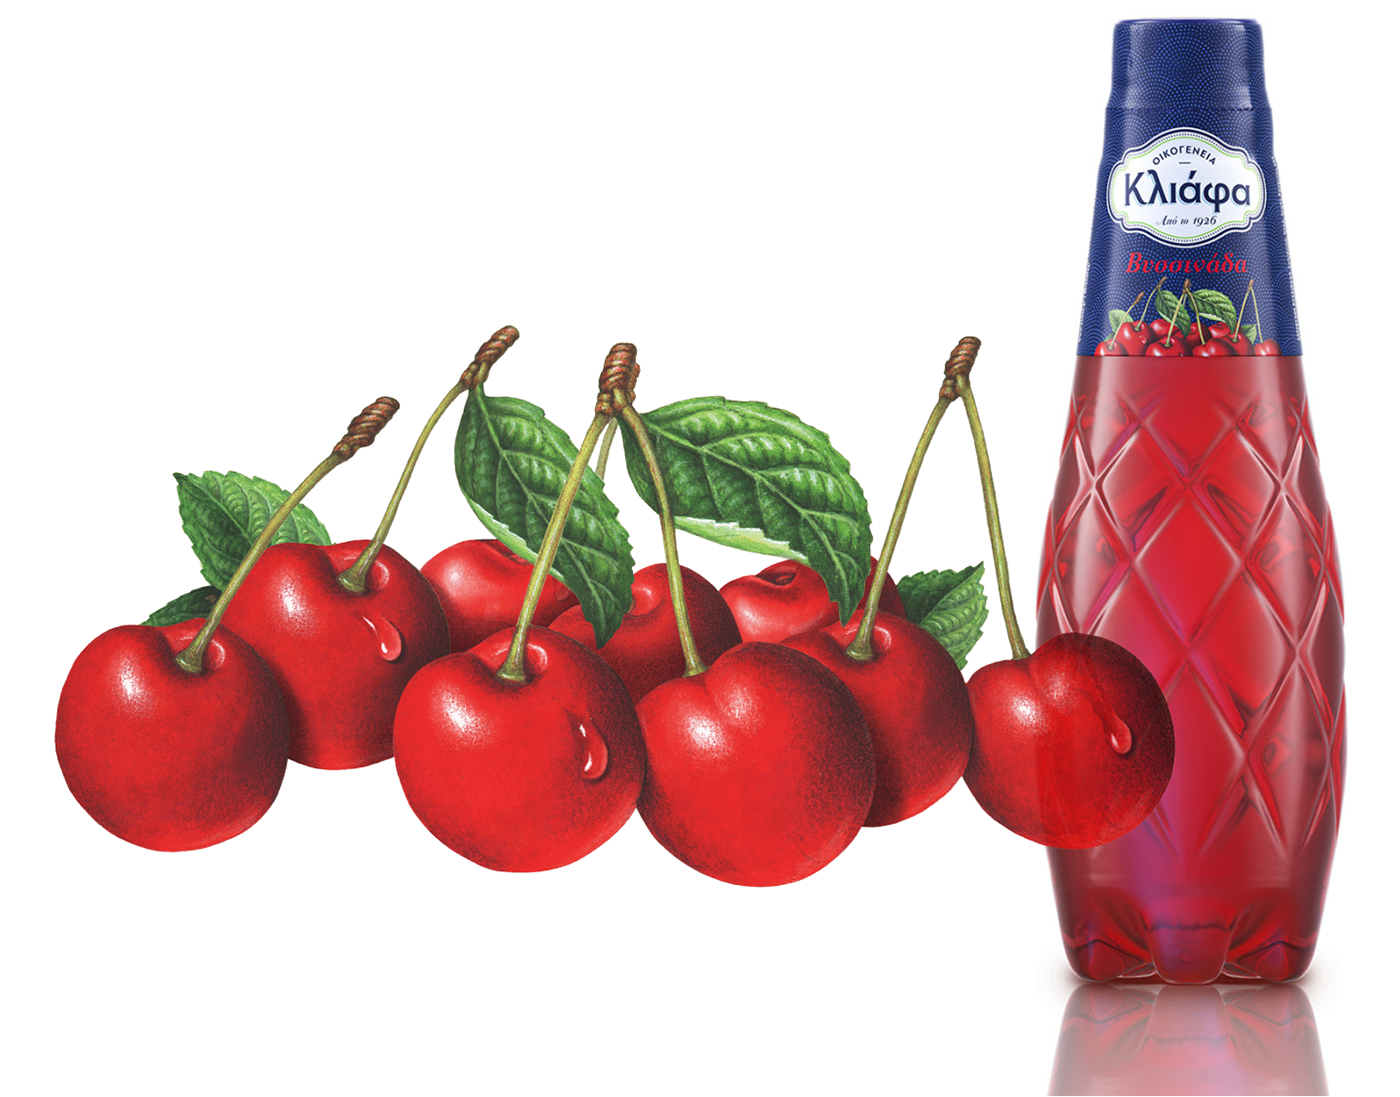 Fruit illustration of cherries used on packaging for a cherry drink.